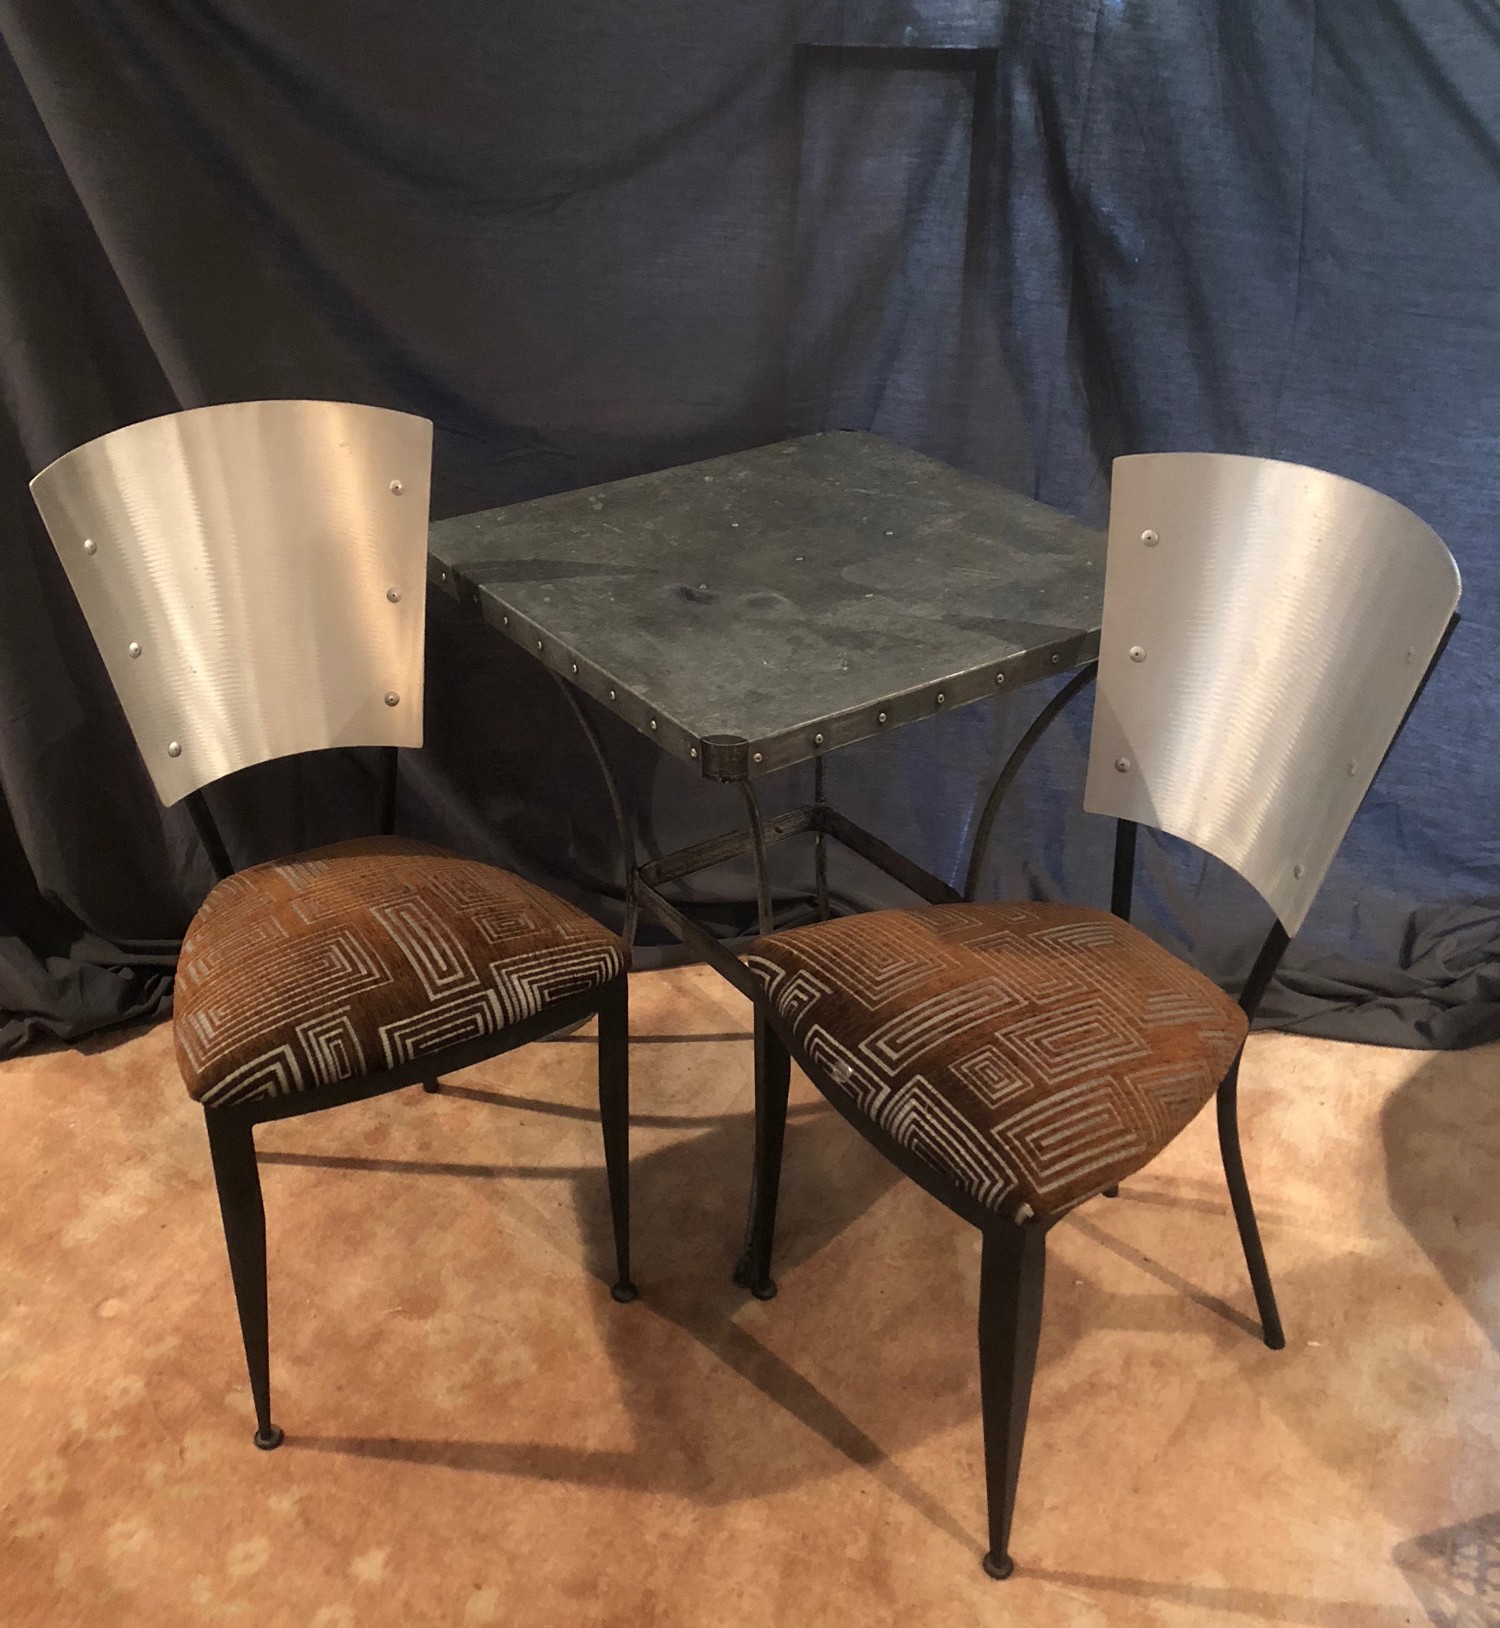 Modern upholstered Metal Bistro Chairs w/Metal Table